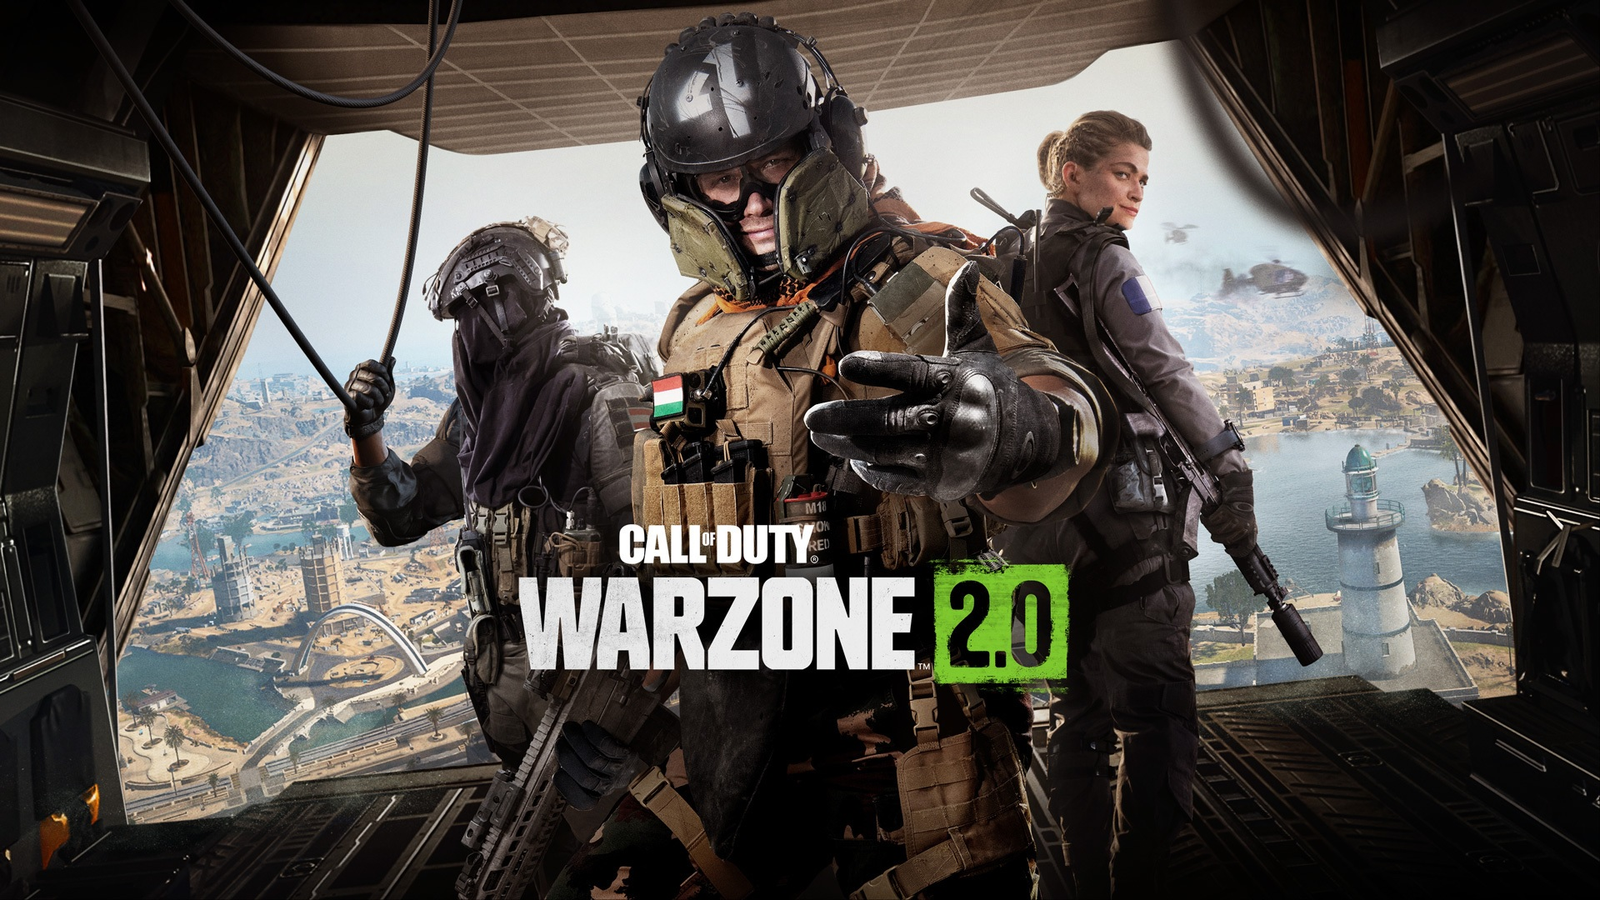 Warzone 2 and MW2 Season 5 Reloaded download size on all platforms